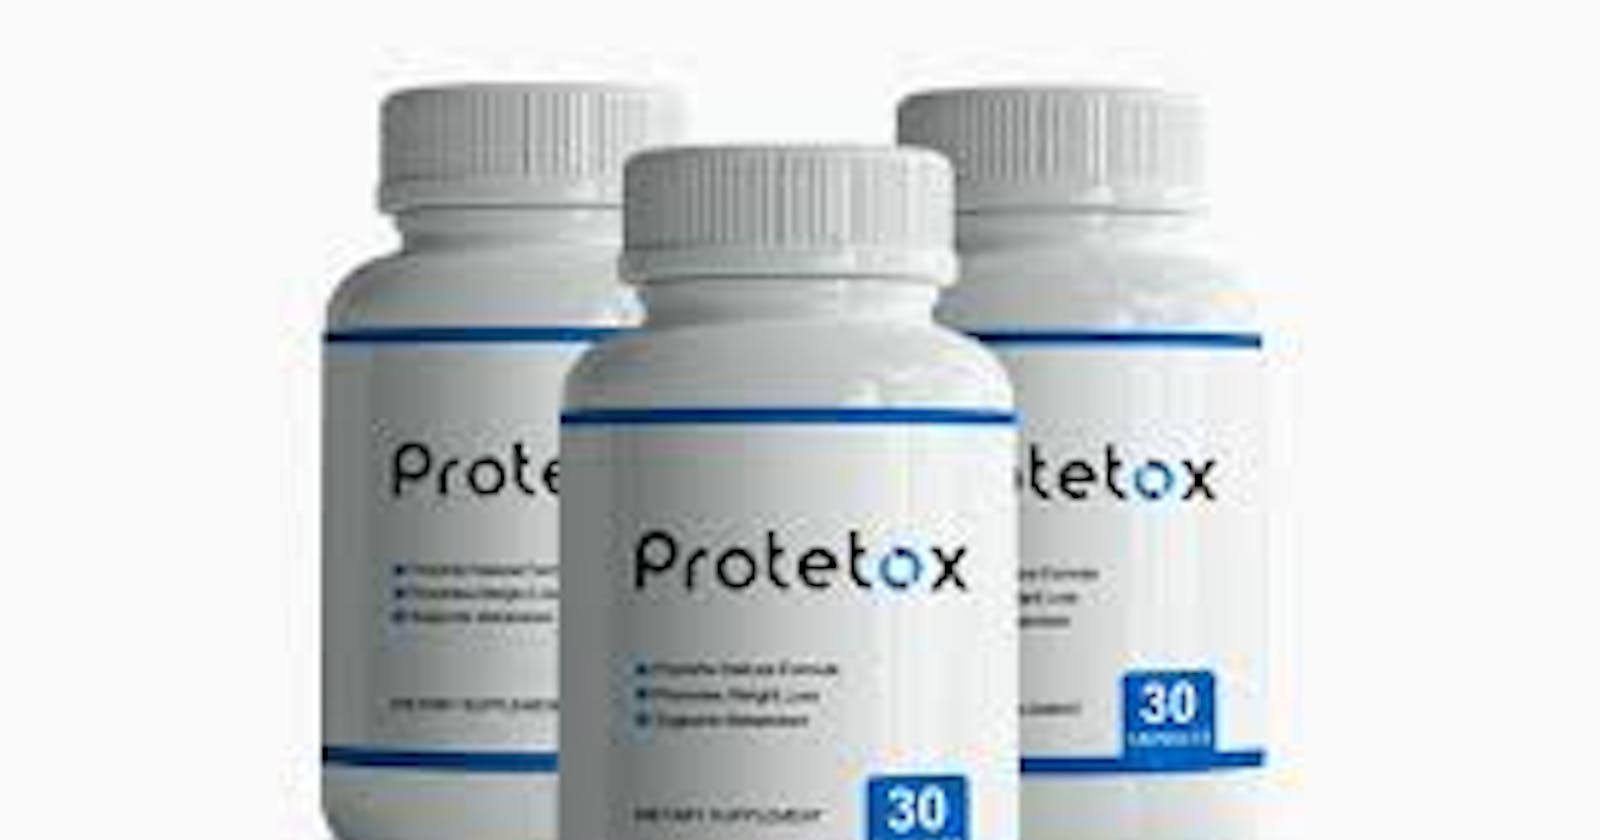 Protetox Reviews: Does it Work? Scam or Legit Weight Loss Formula!